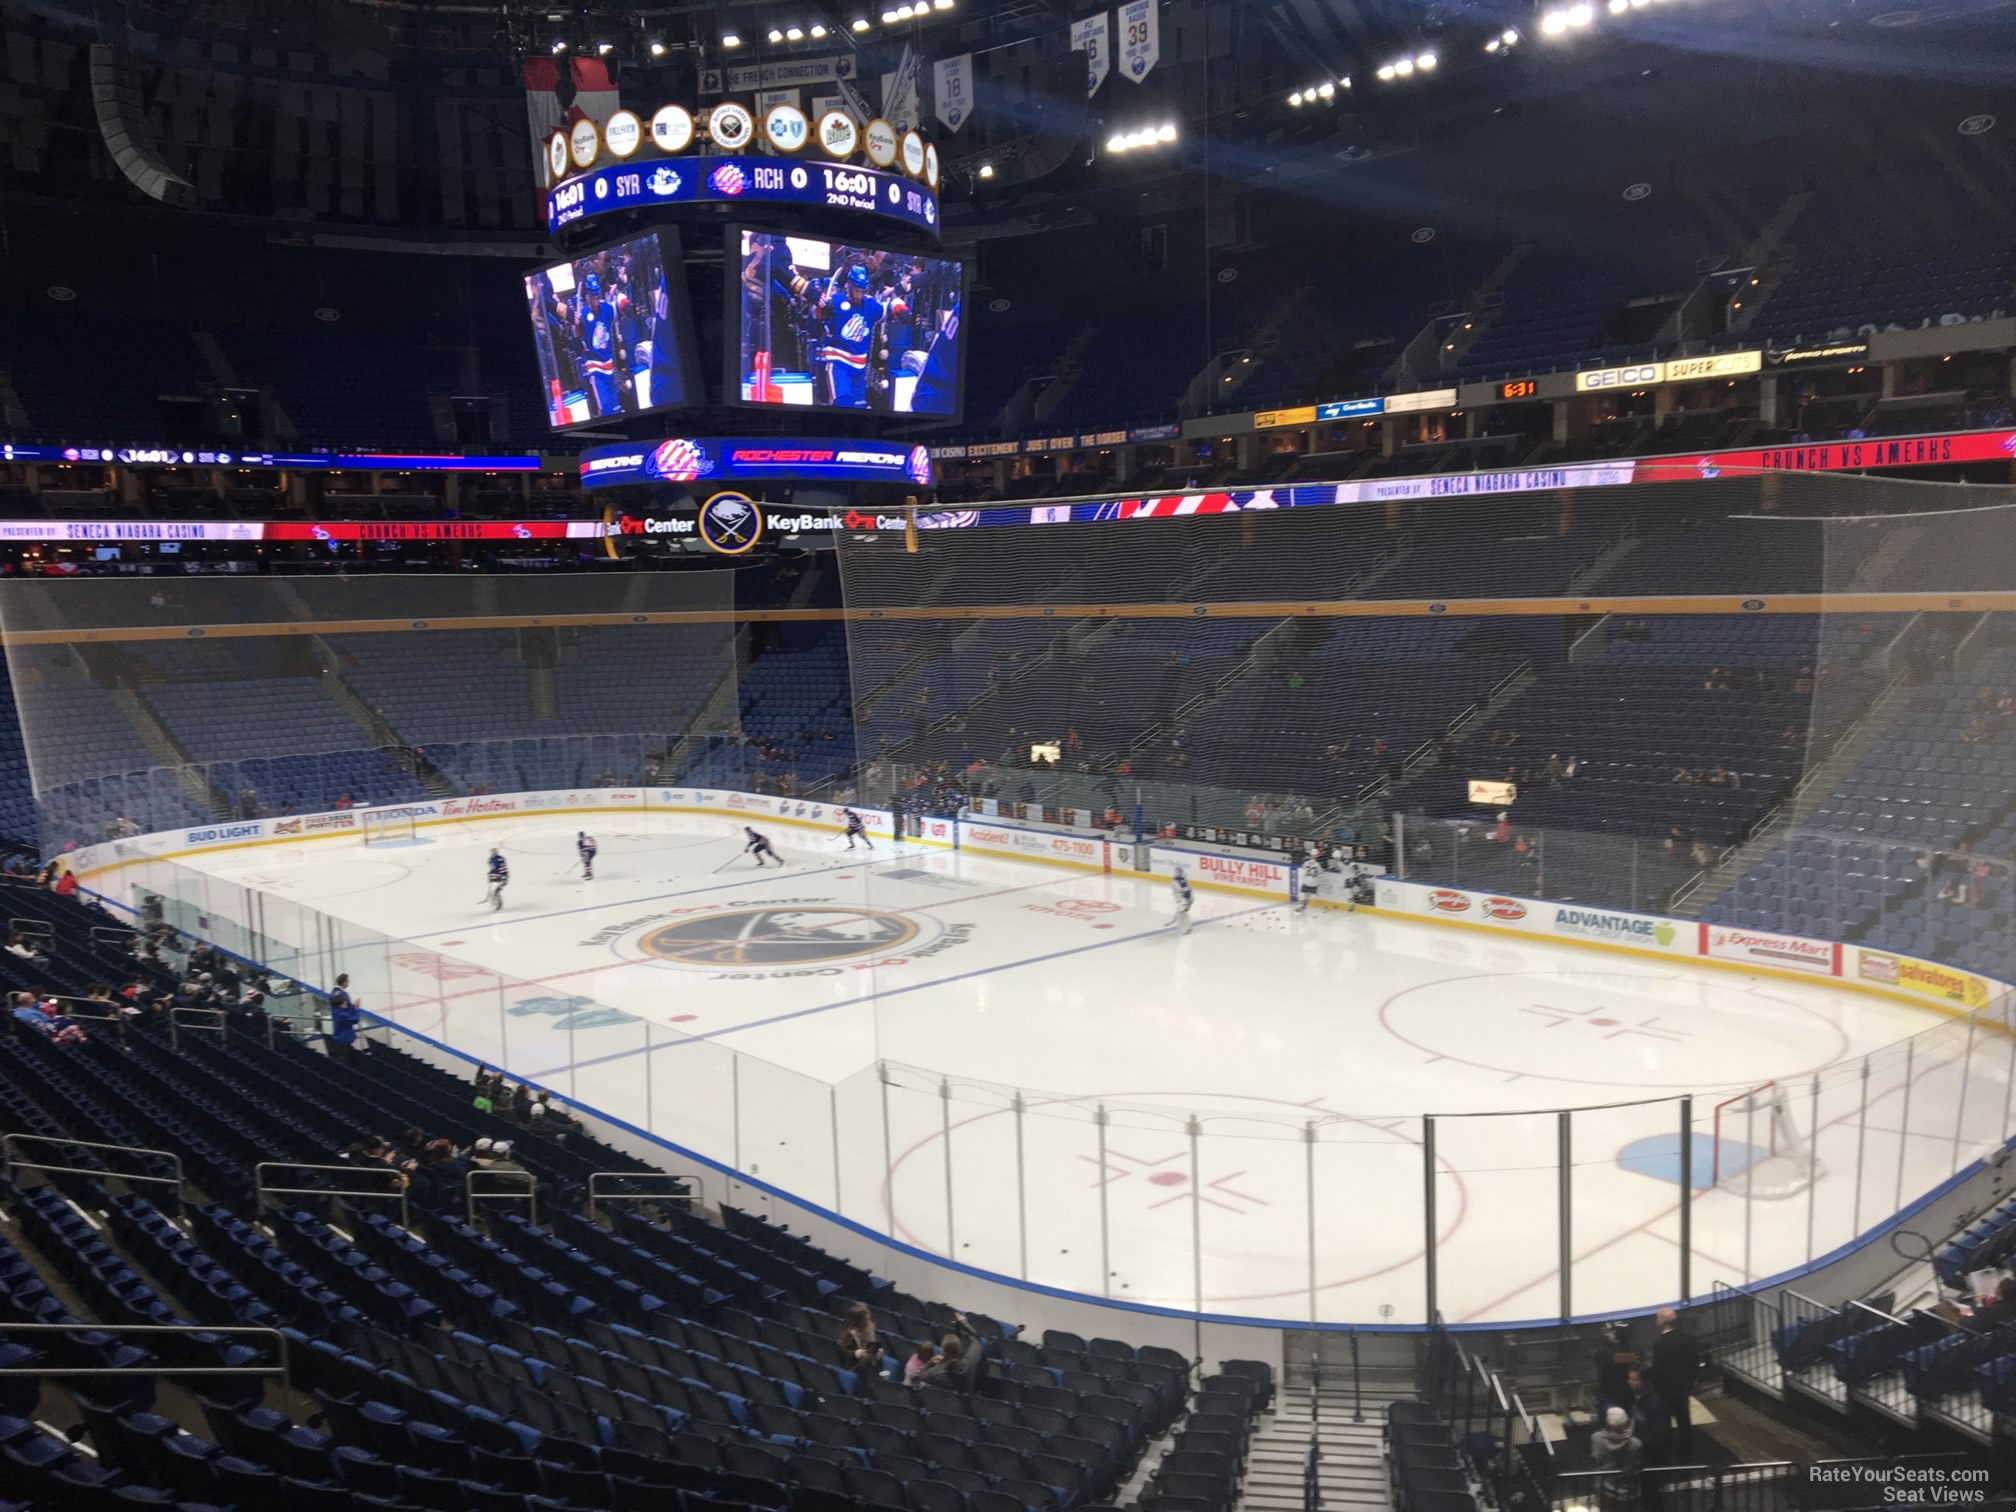 section 213, row 4 seat view  for hockey - keybank center